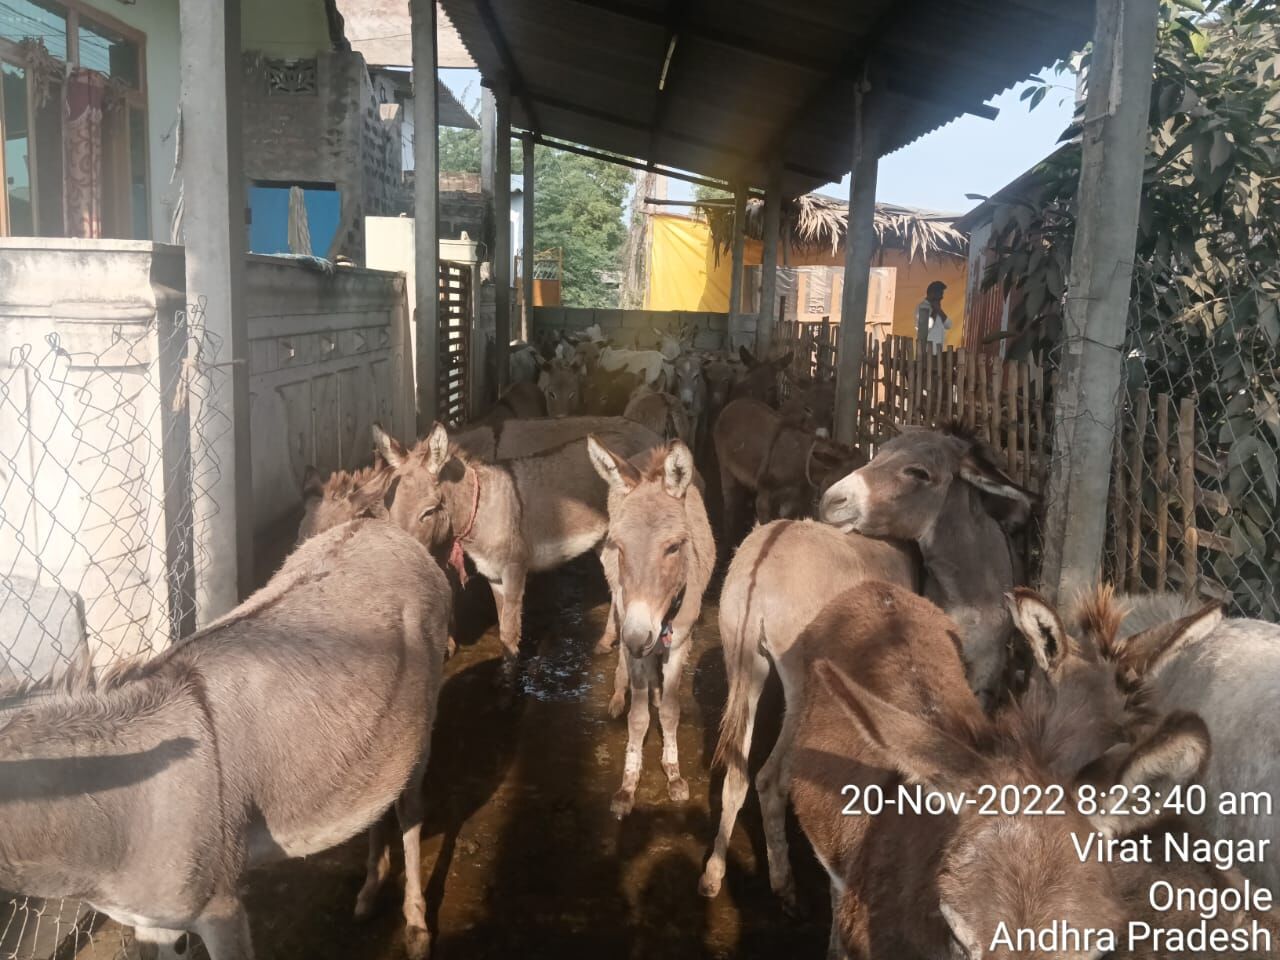 Explained: Why illegal donkey slaughter rackets are on the rise in AP